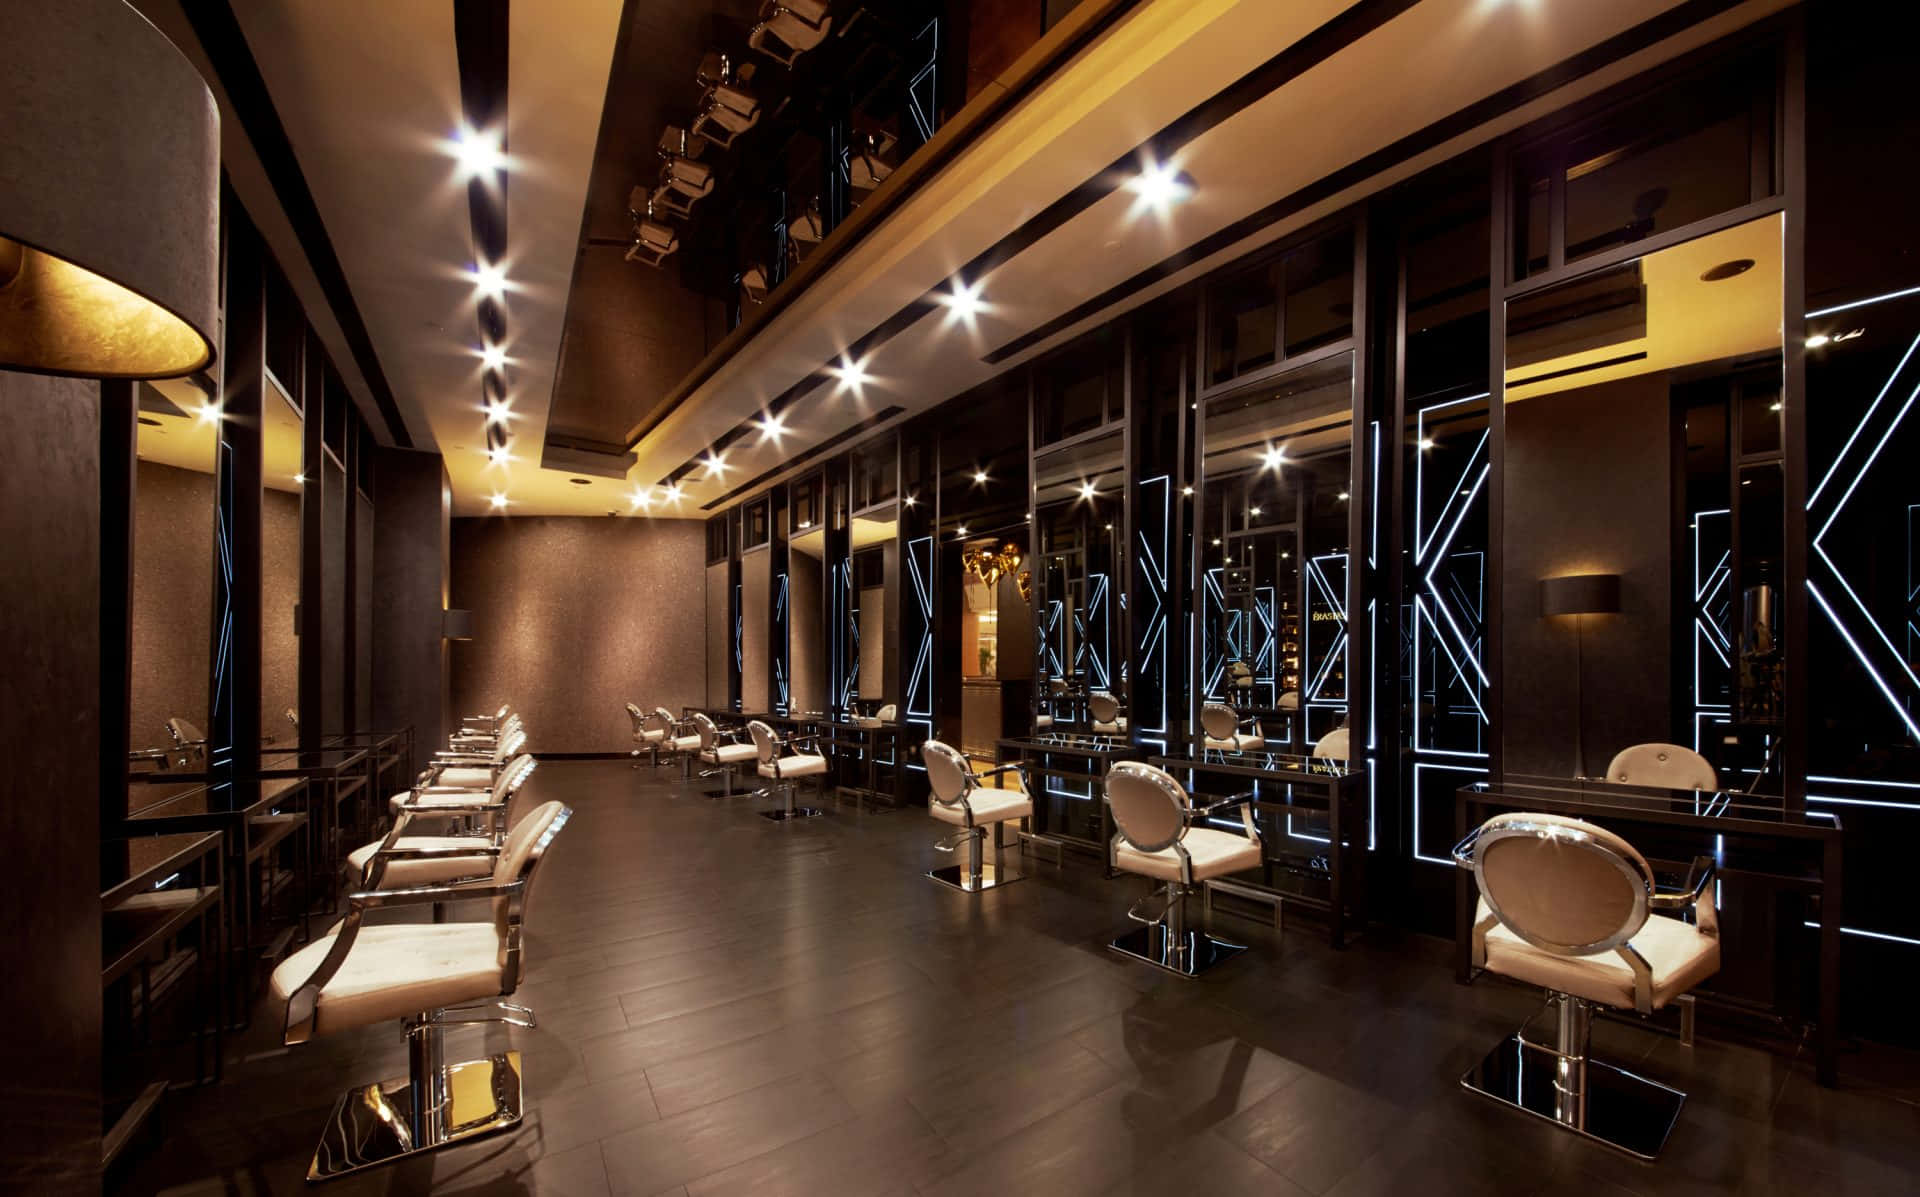 Get pampered at the hottest Hair Salon in town!